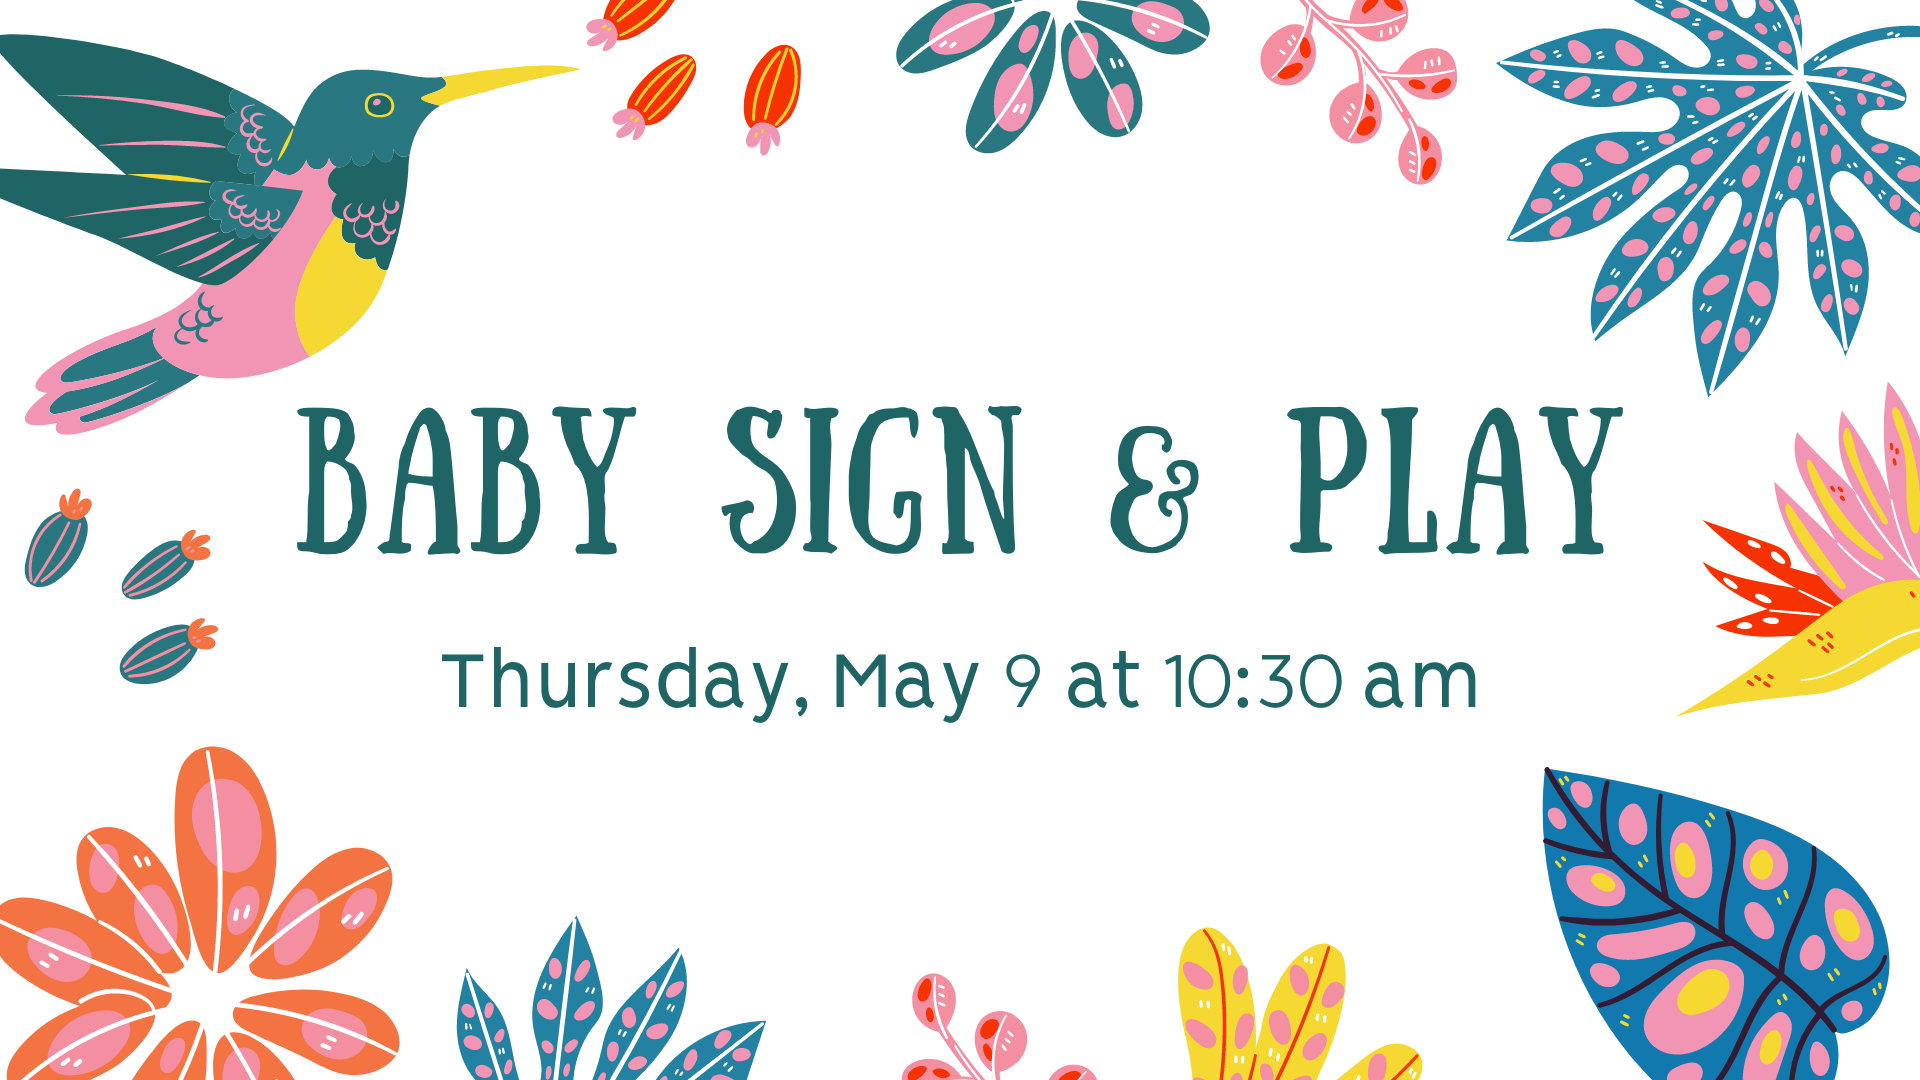 Baby Sign & Play